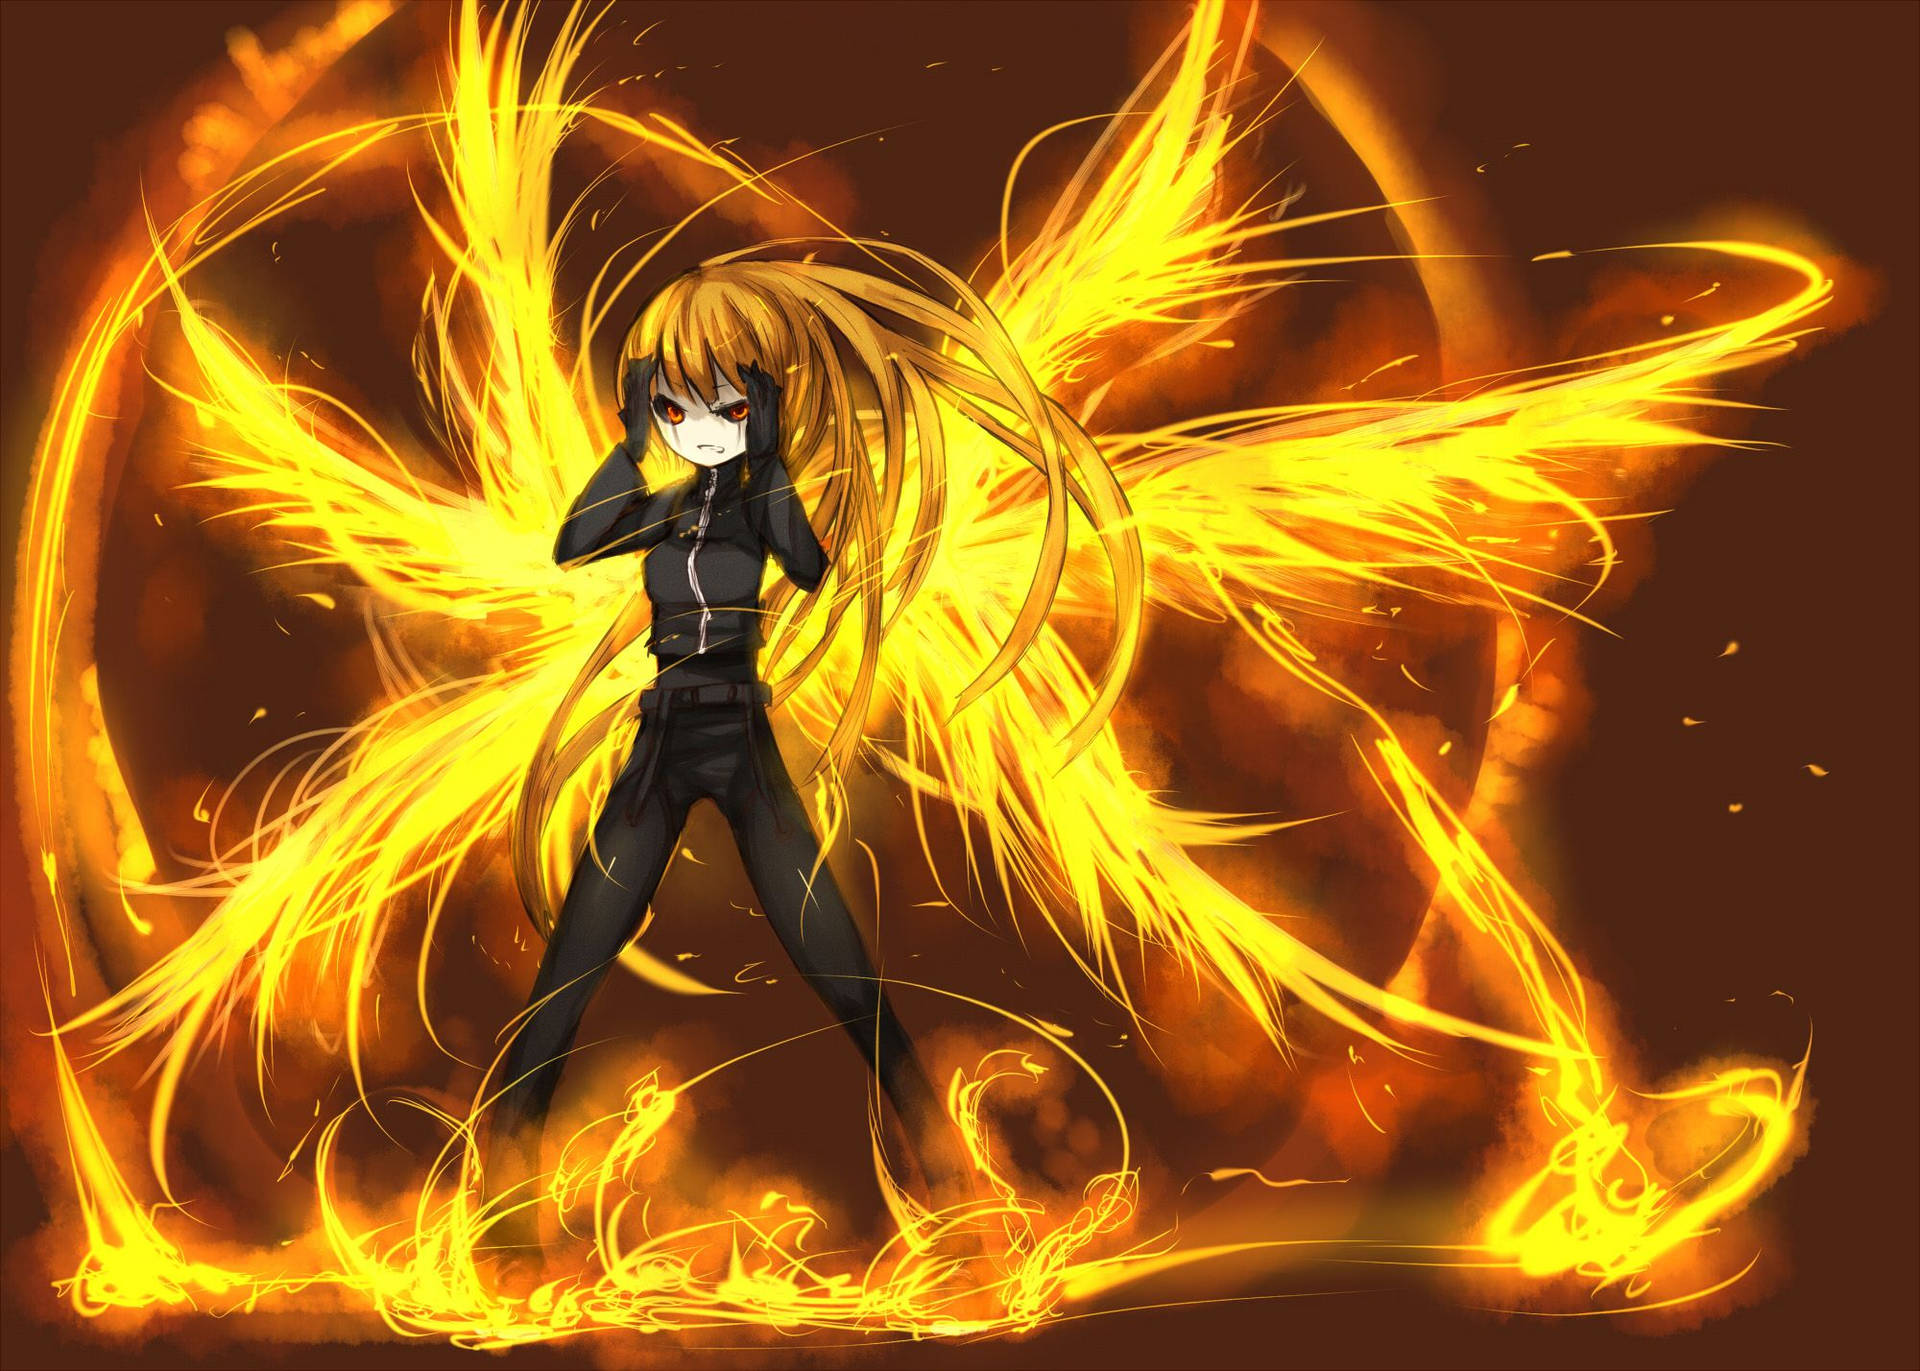 Flaming Wings Over The City Wallpaper